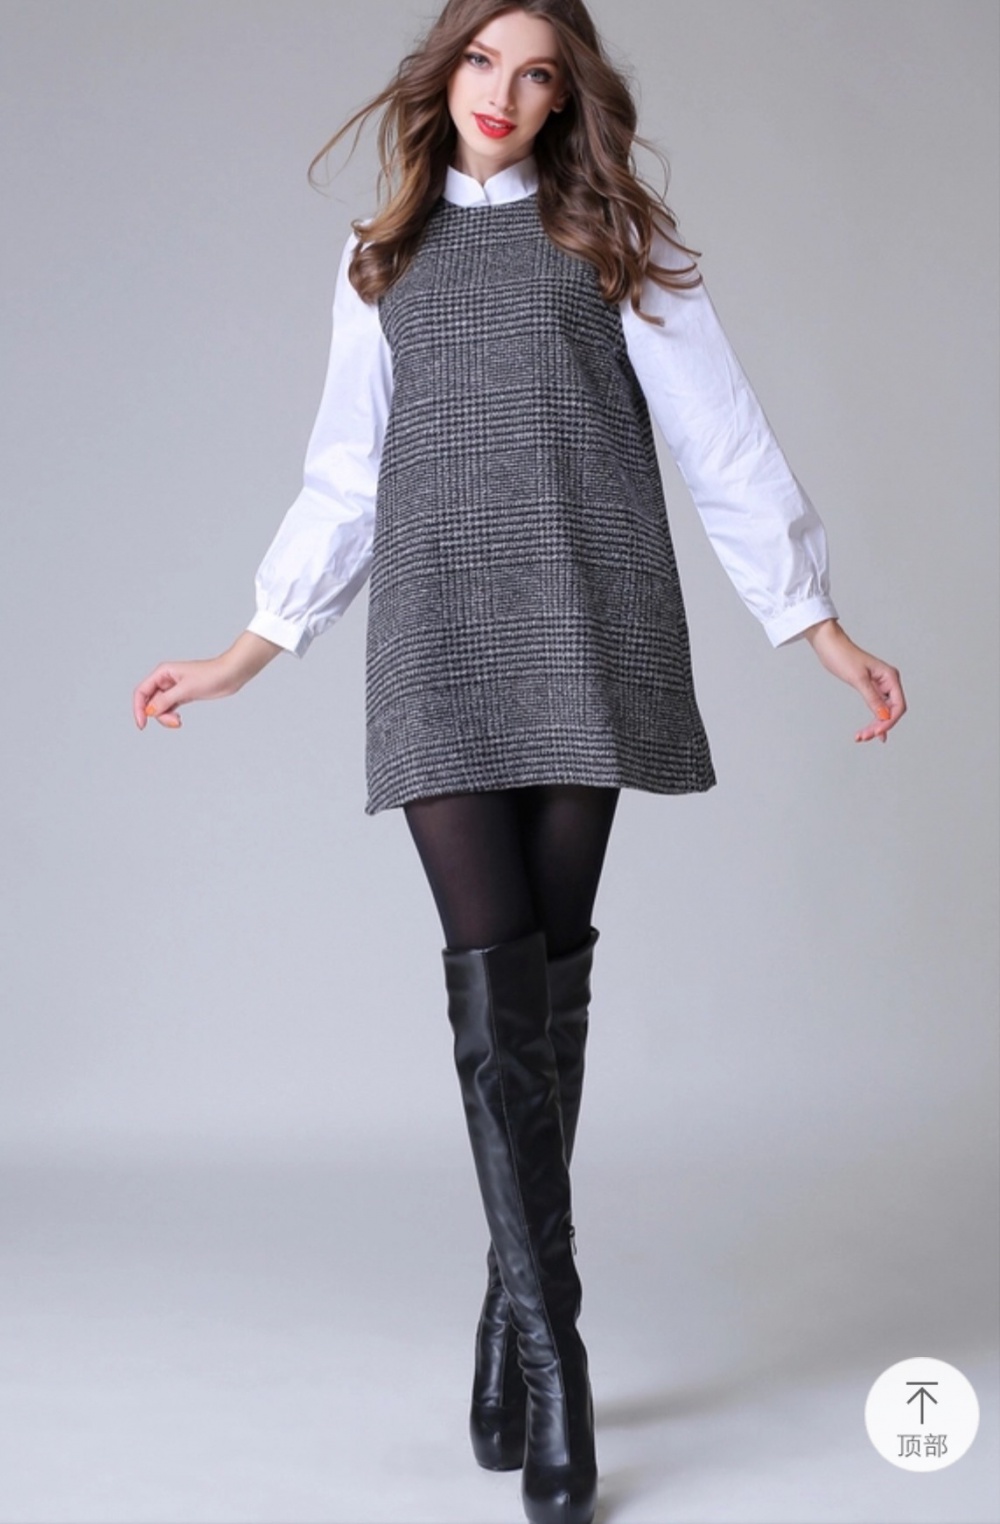 Plaid lovely woolen autumn and winter Pseudo-two dress